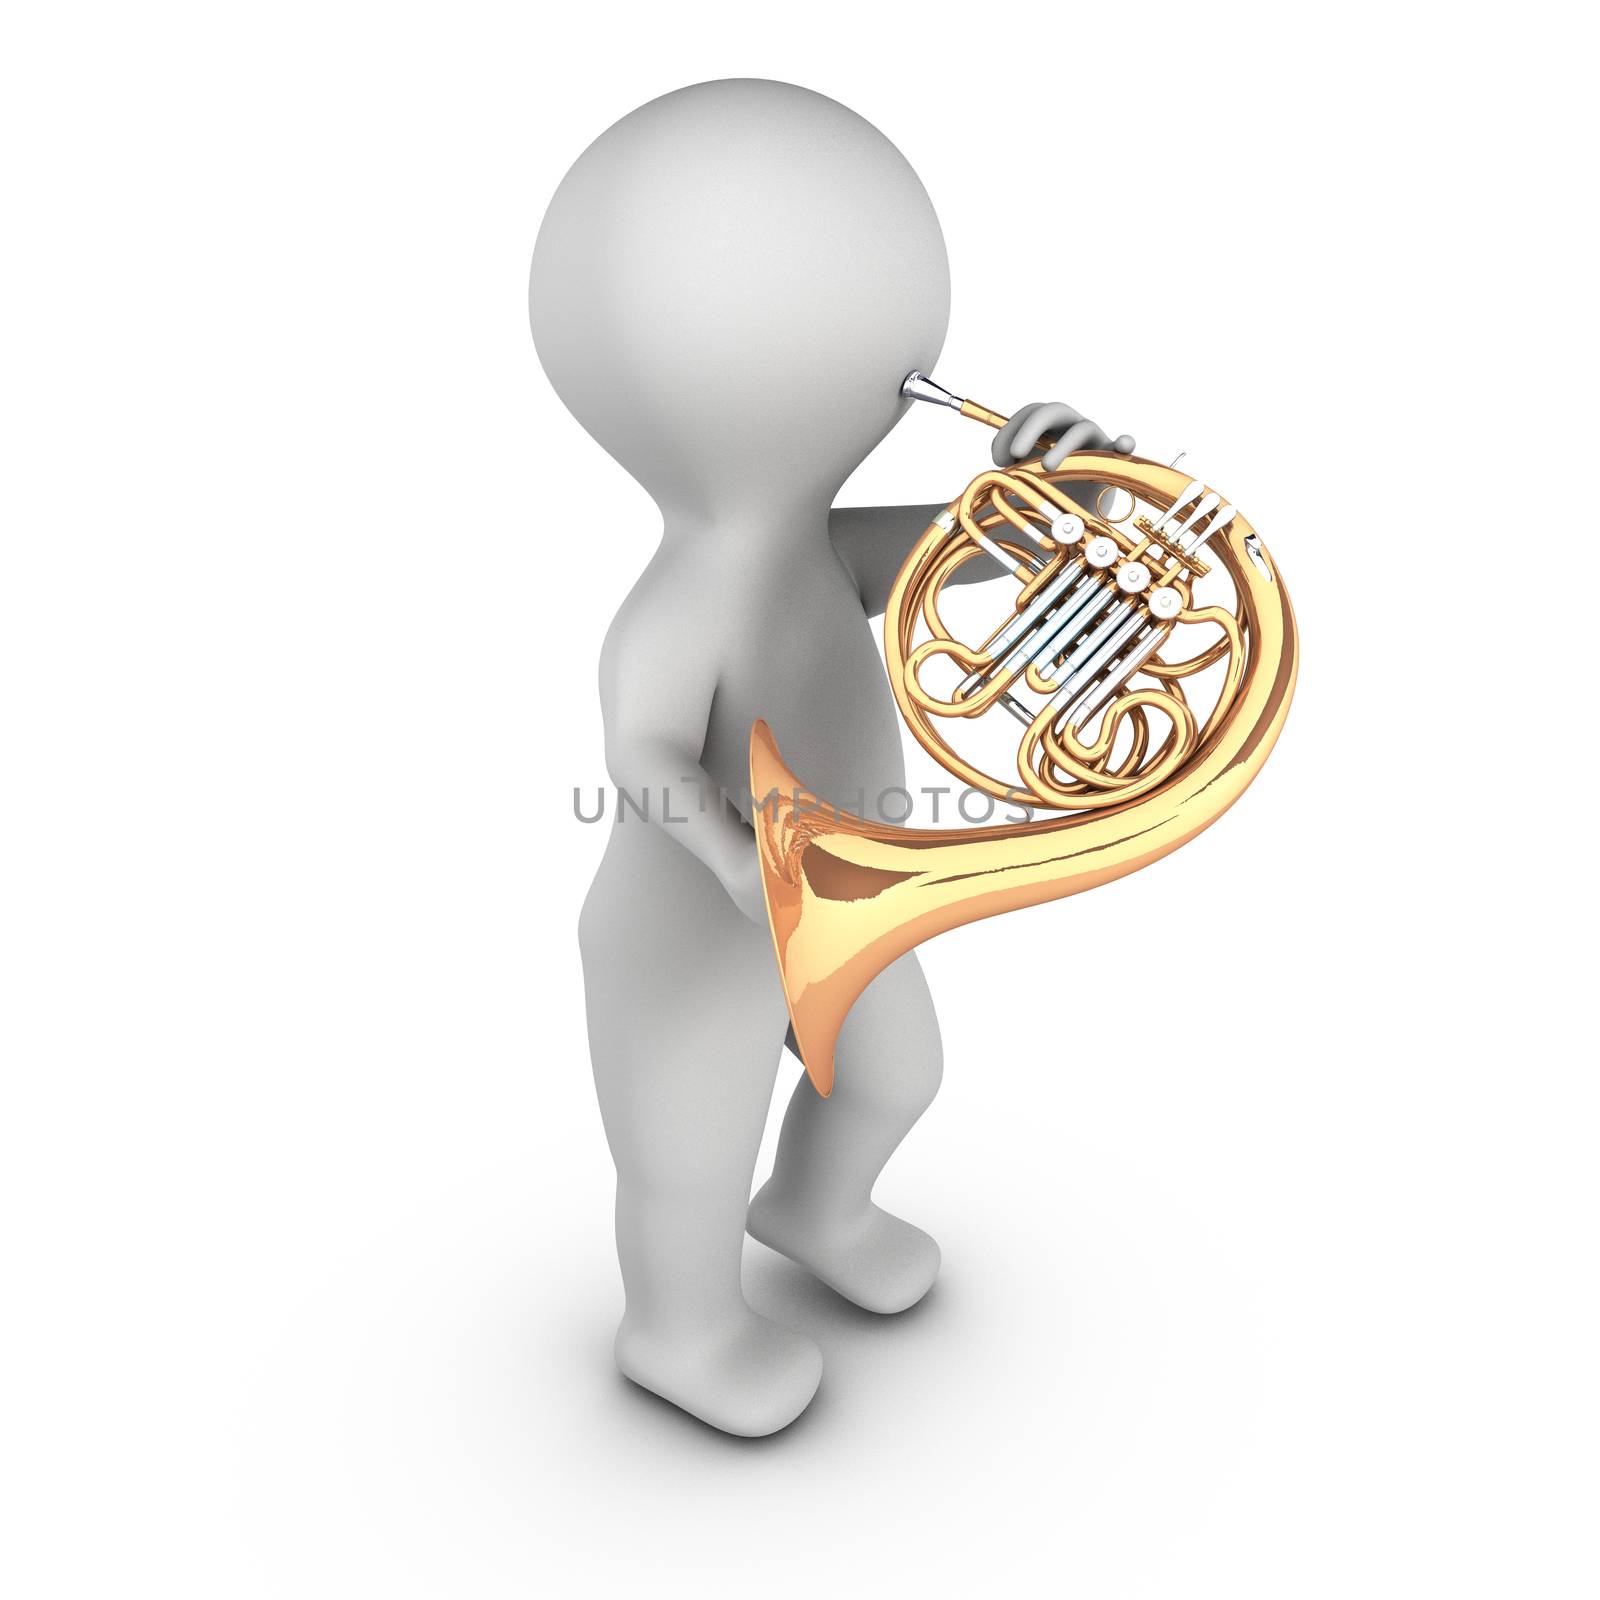 A 3D character playing french horn (corniste). The french horn is a wind instrument.